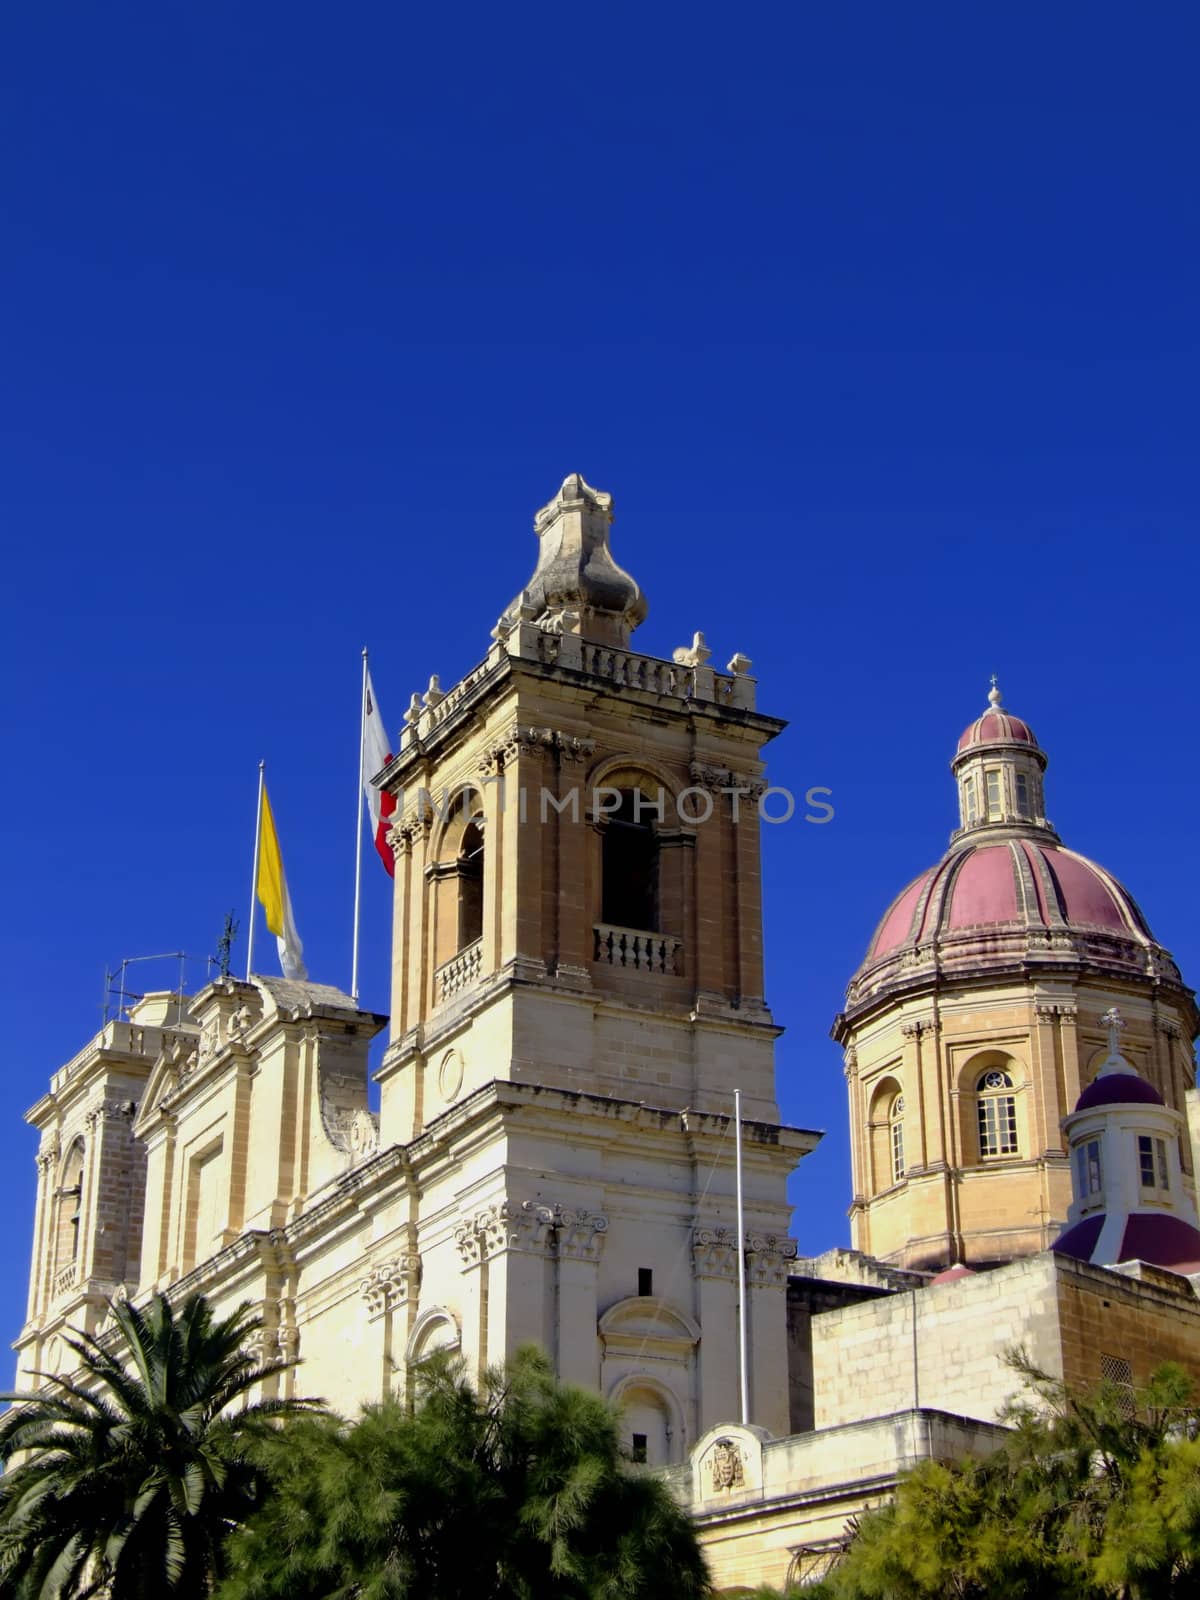 St. Lawrence Church in the historical city of Vittoriosa in Malta